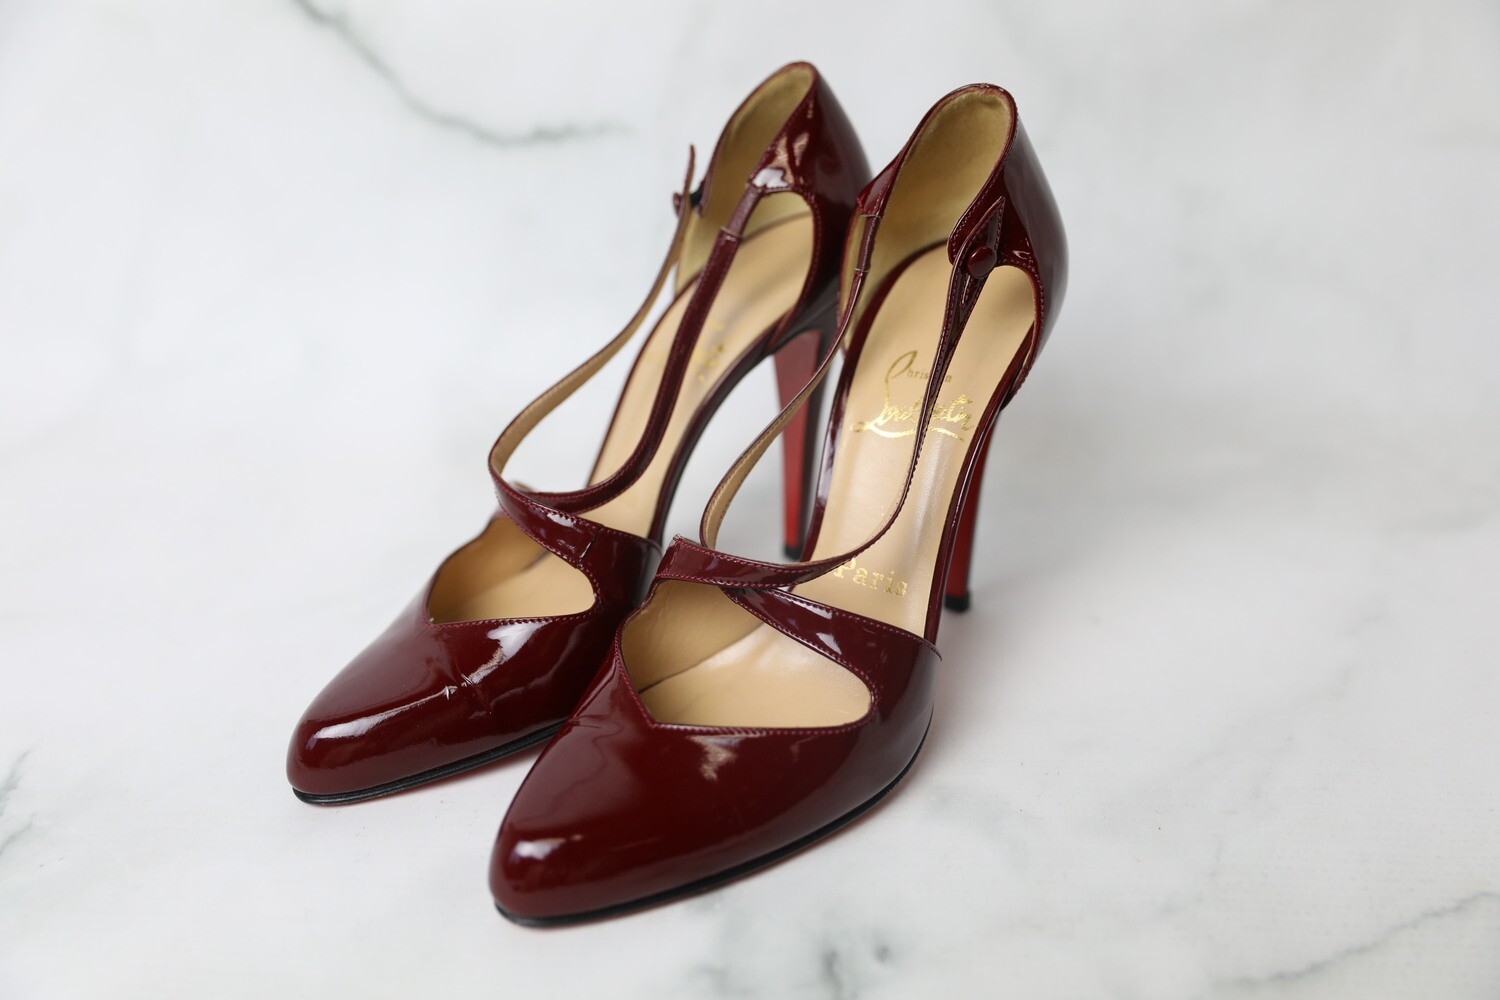 Christian Louboutin Shoes Red Classic Triclo 100mm Patent Leather  Criss-cross Burgundy Wine Pumps Heels, New in Box WA001 - Julia Rose Boston